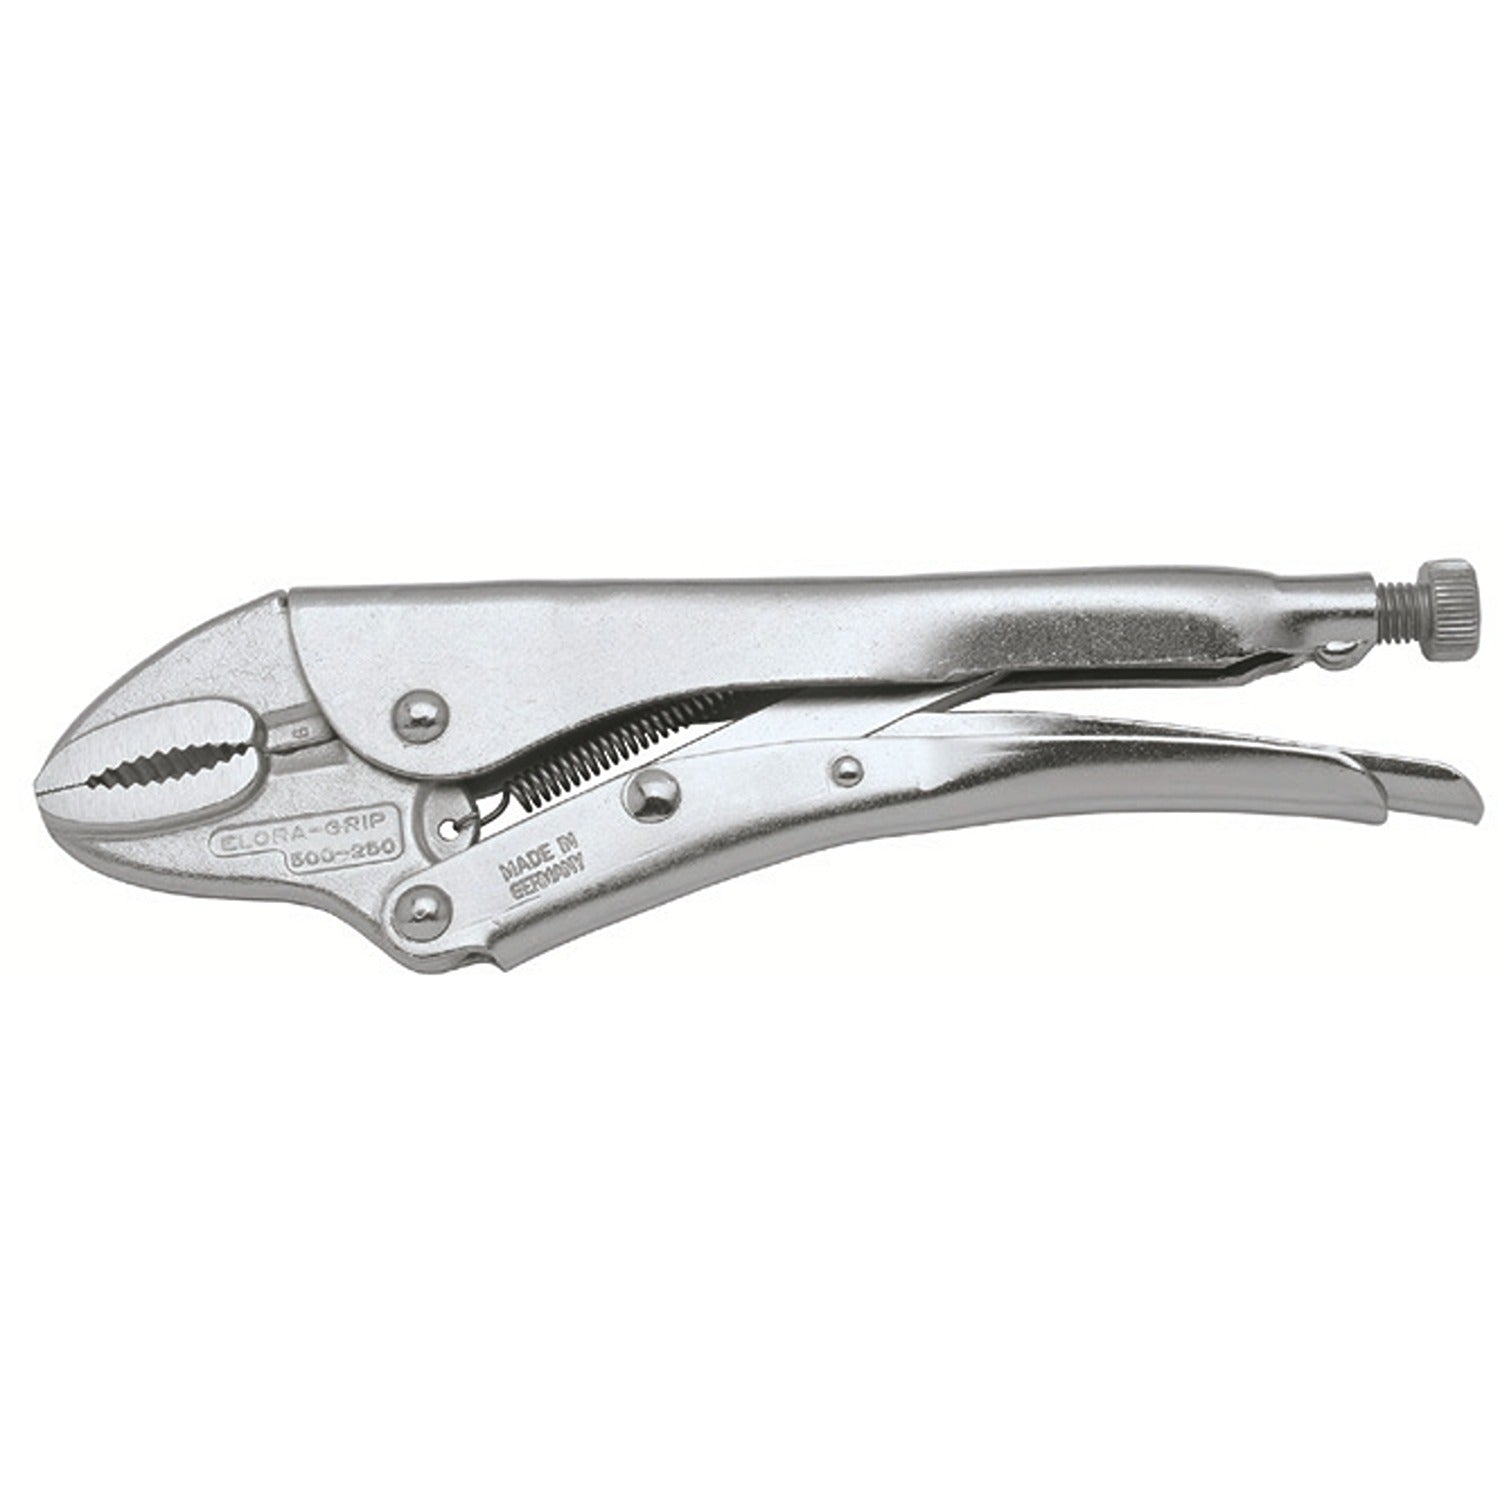 ELORA 500 Curved Jaws Grip Plier With Wire Cutter (ELORA Tools) - Premium Curved Jaws Grip Plier from ELORA - Shop now at Yew Aik.